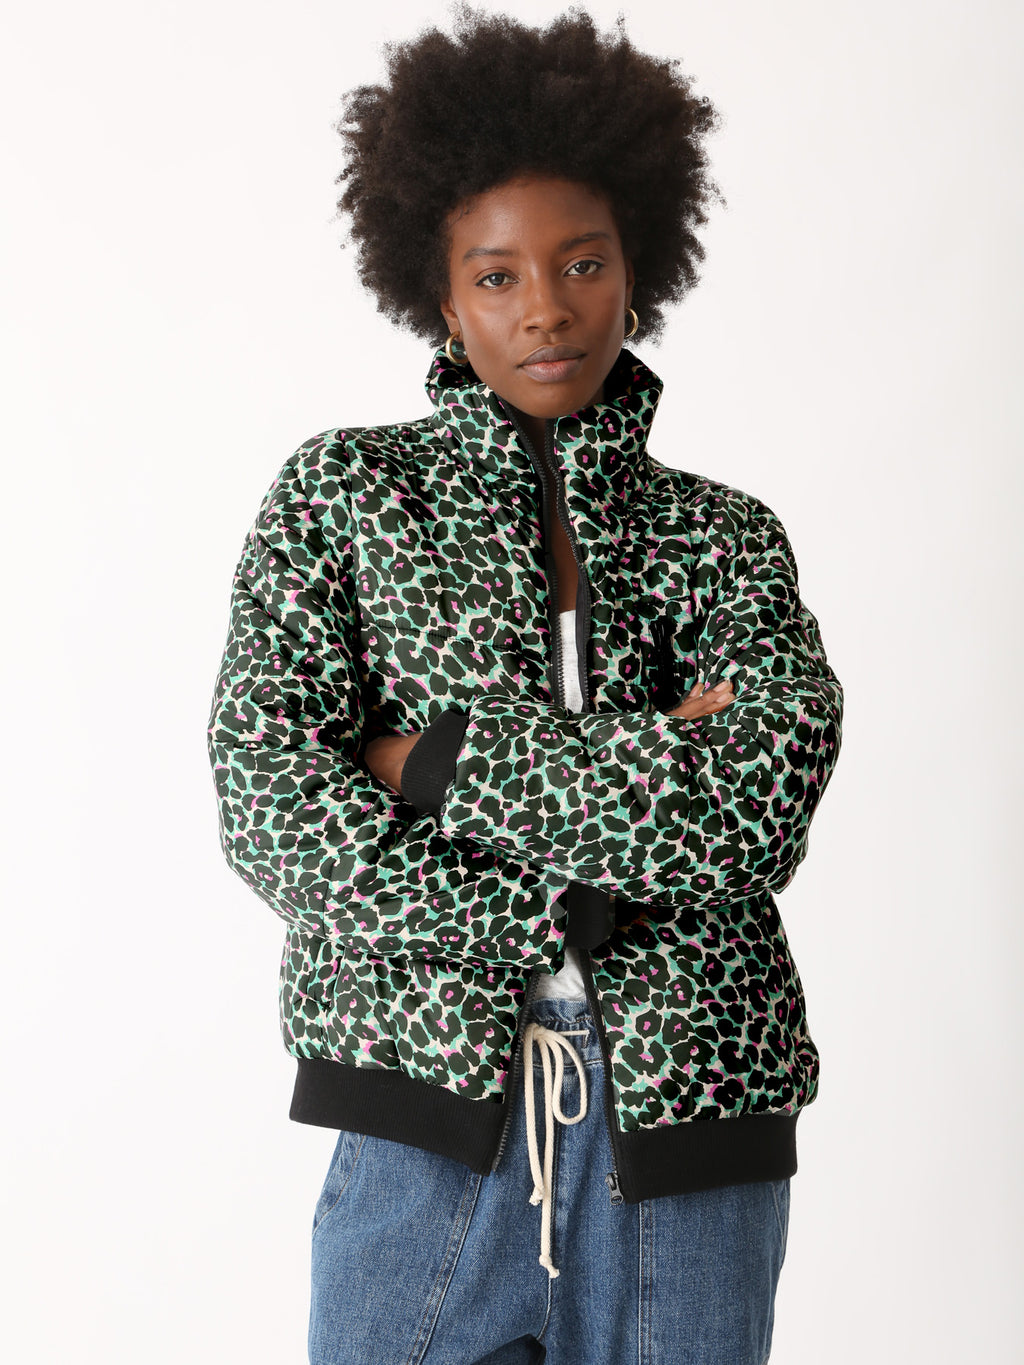 Puffy Jacket - Electric Leopard